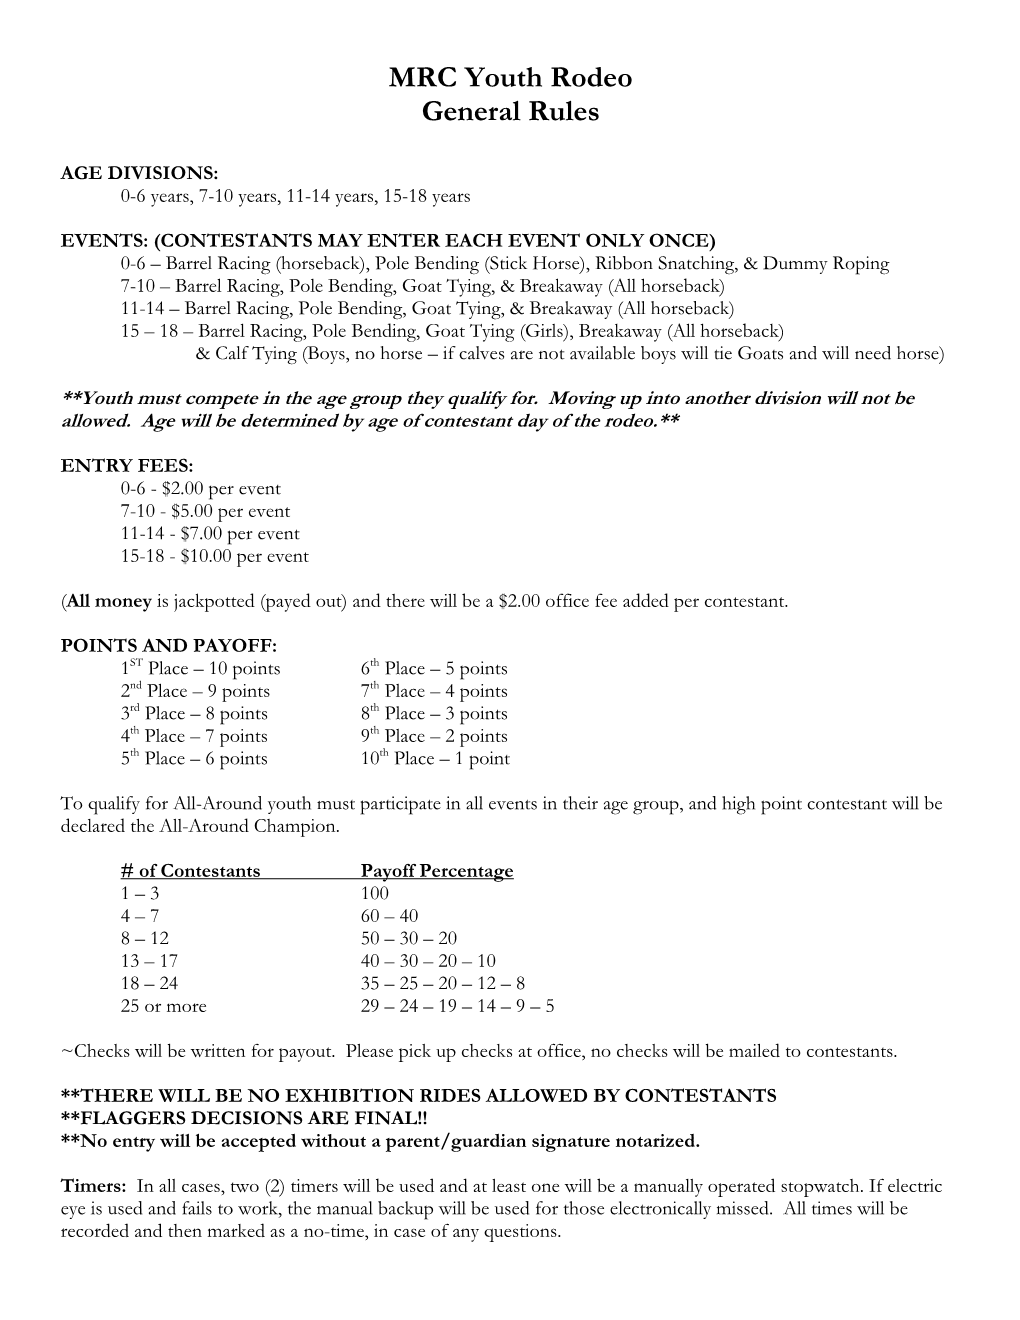 MRC Youth Rodeo General Rules